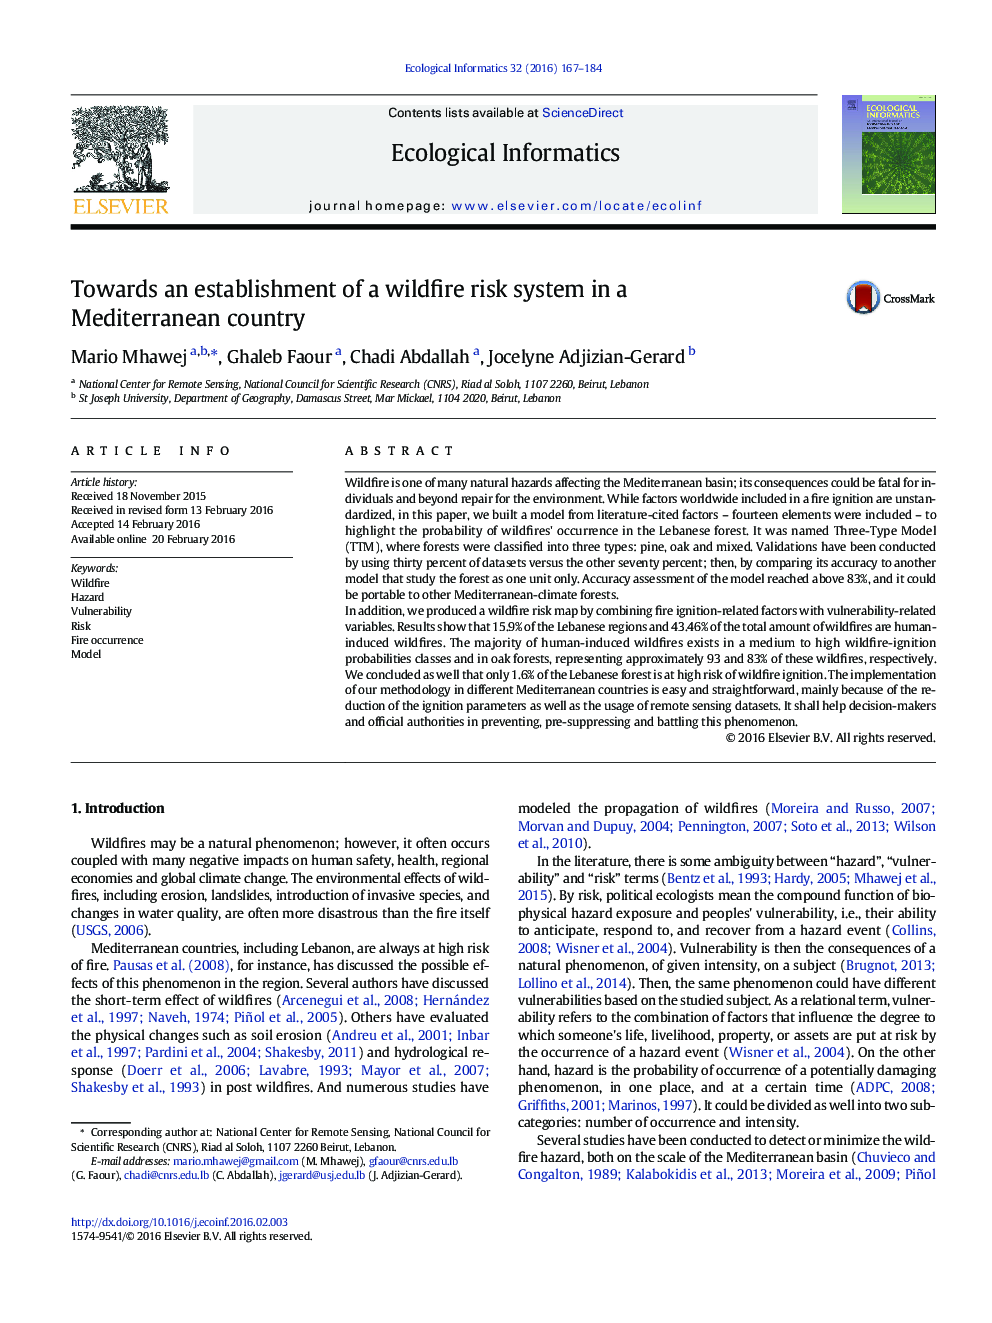 Towards an establishment of a wildfire risk system in a Mediterranean country